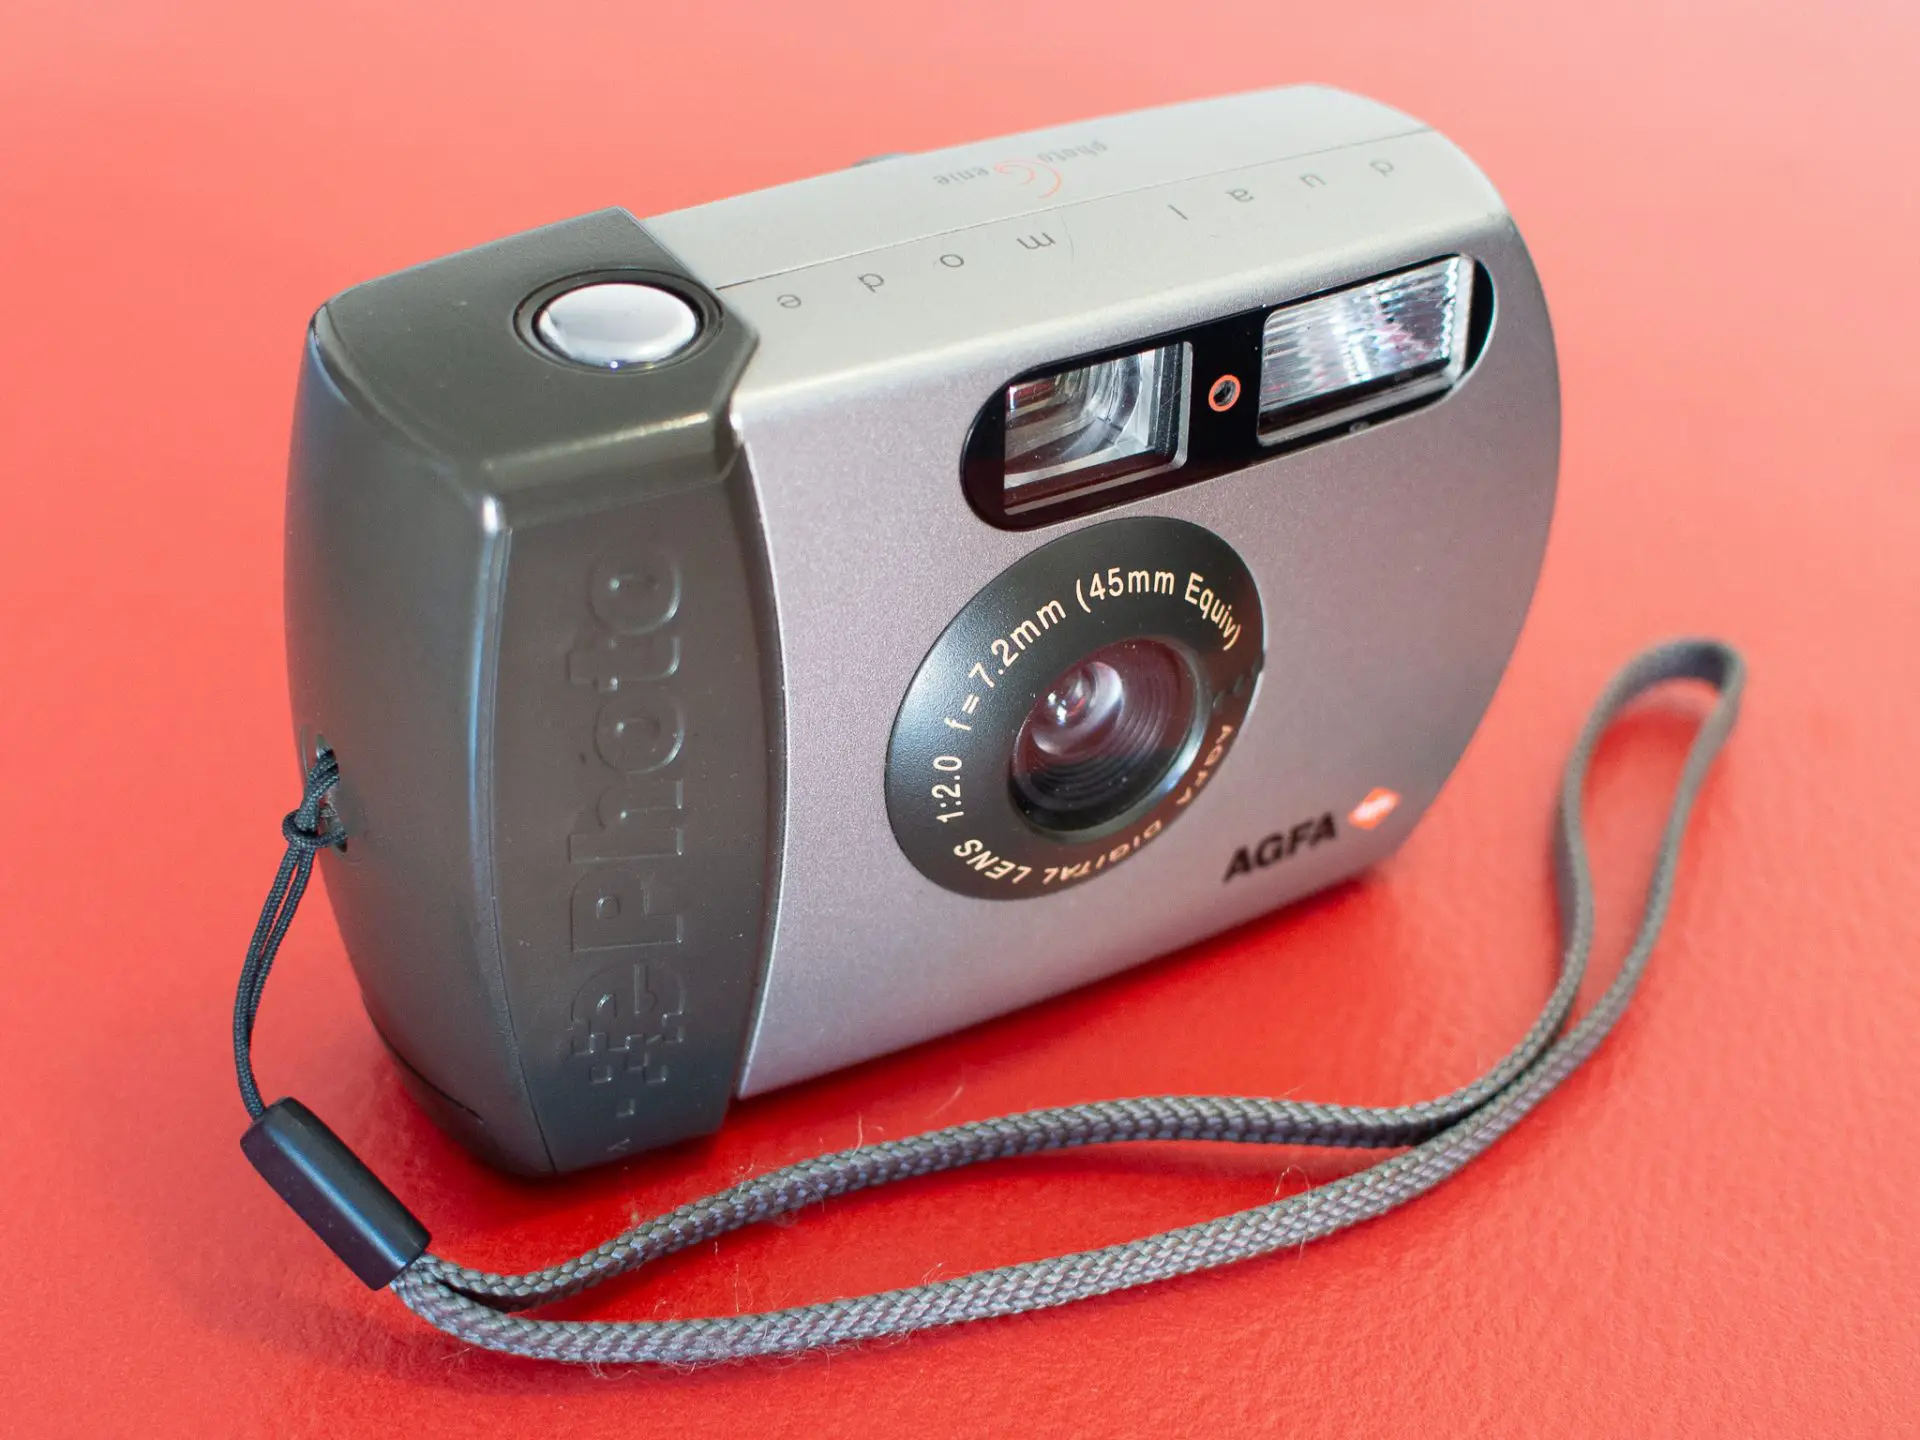 Fujifilm Instax Mini 8 will remind you to use film sparingly